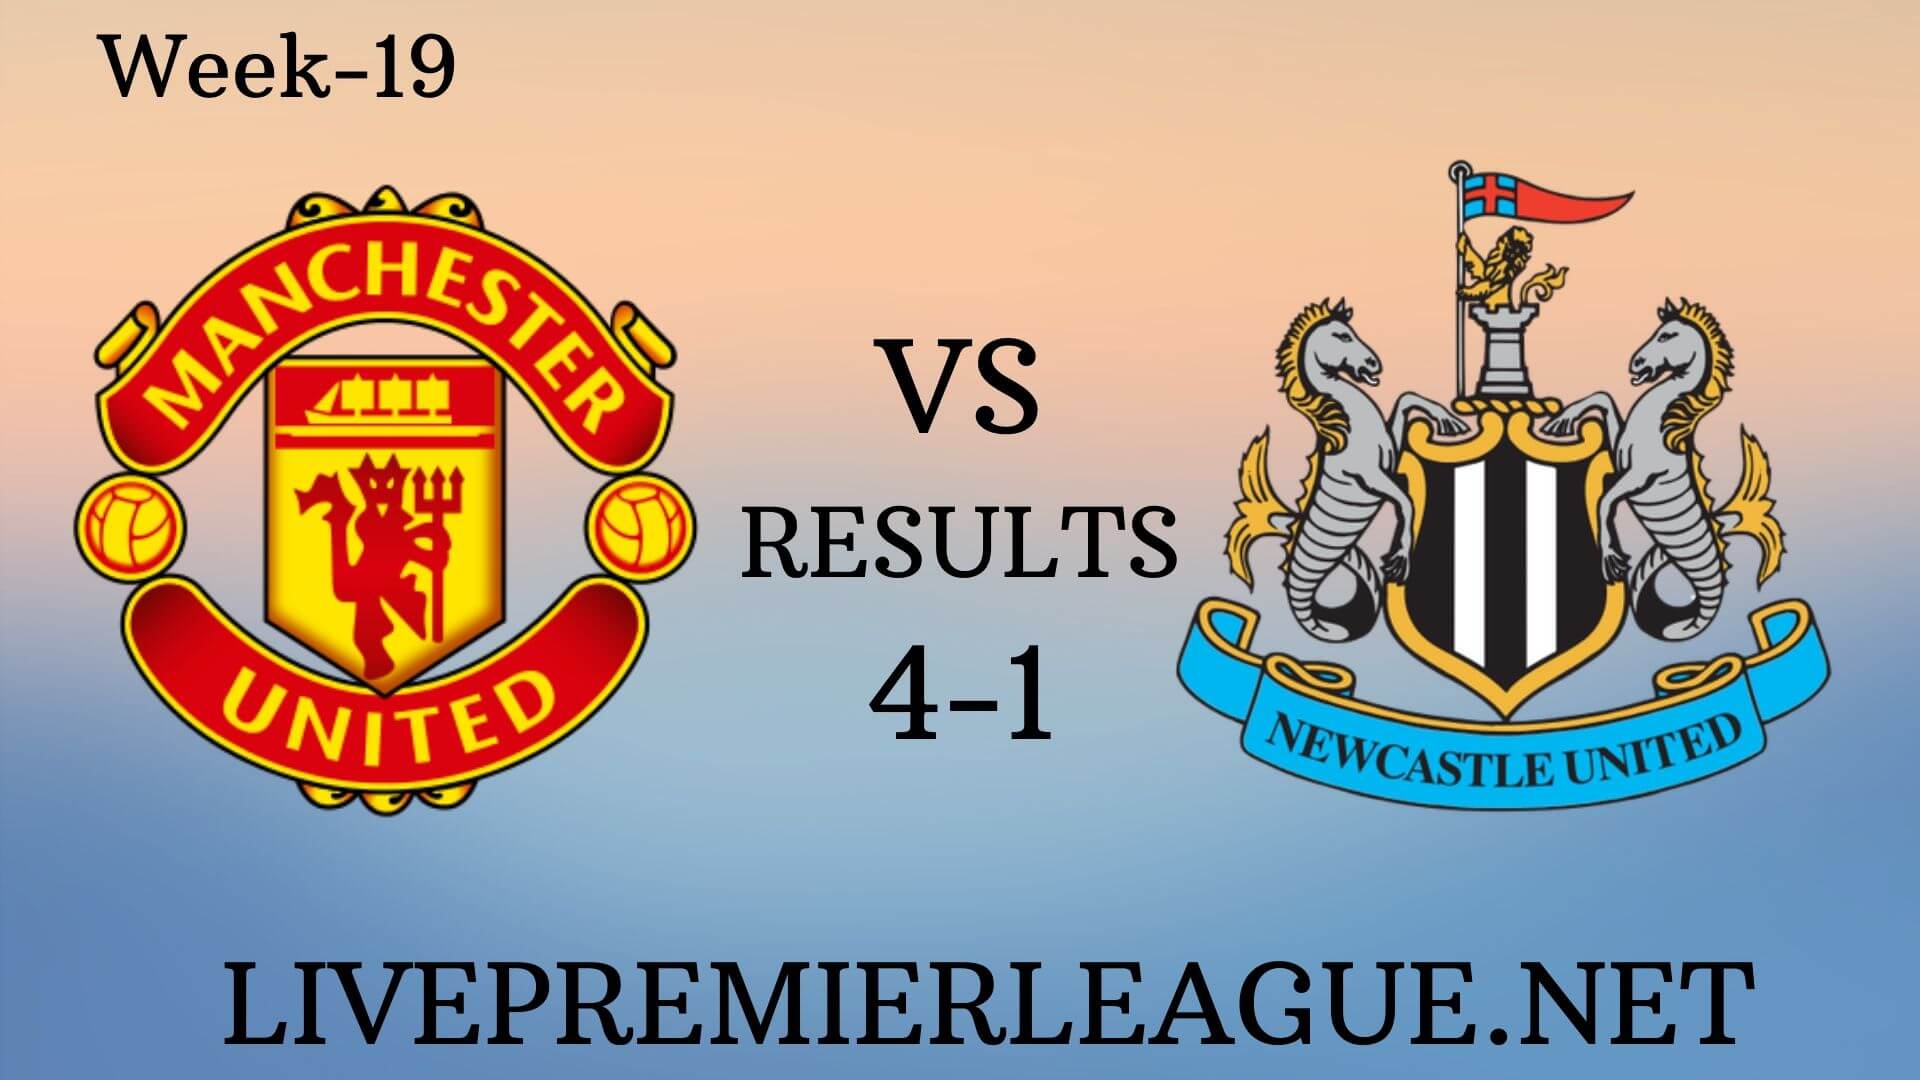 Manchester United Vs Newcastle United | Week 19 Result 2019